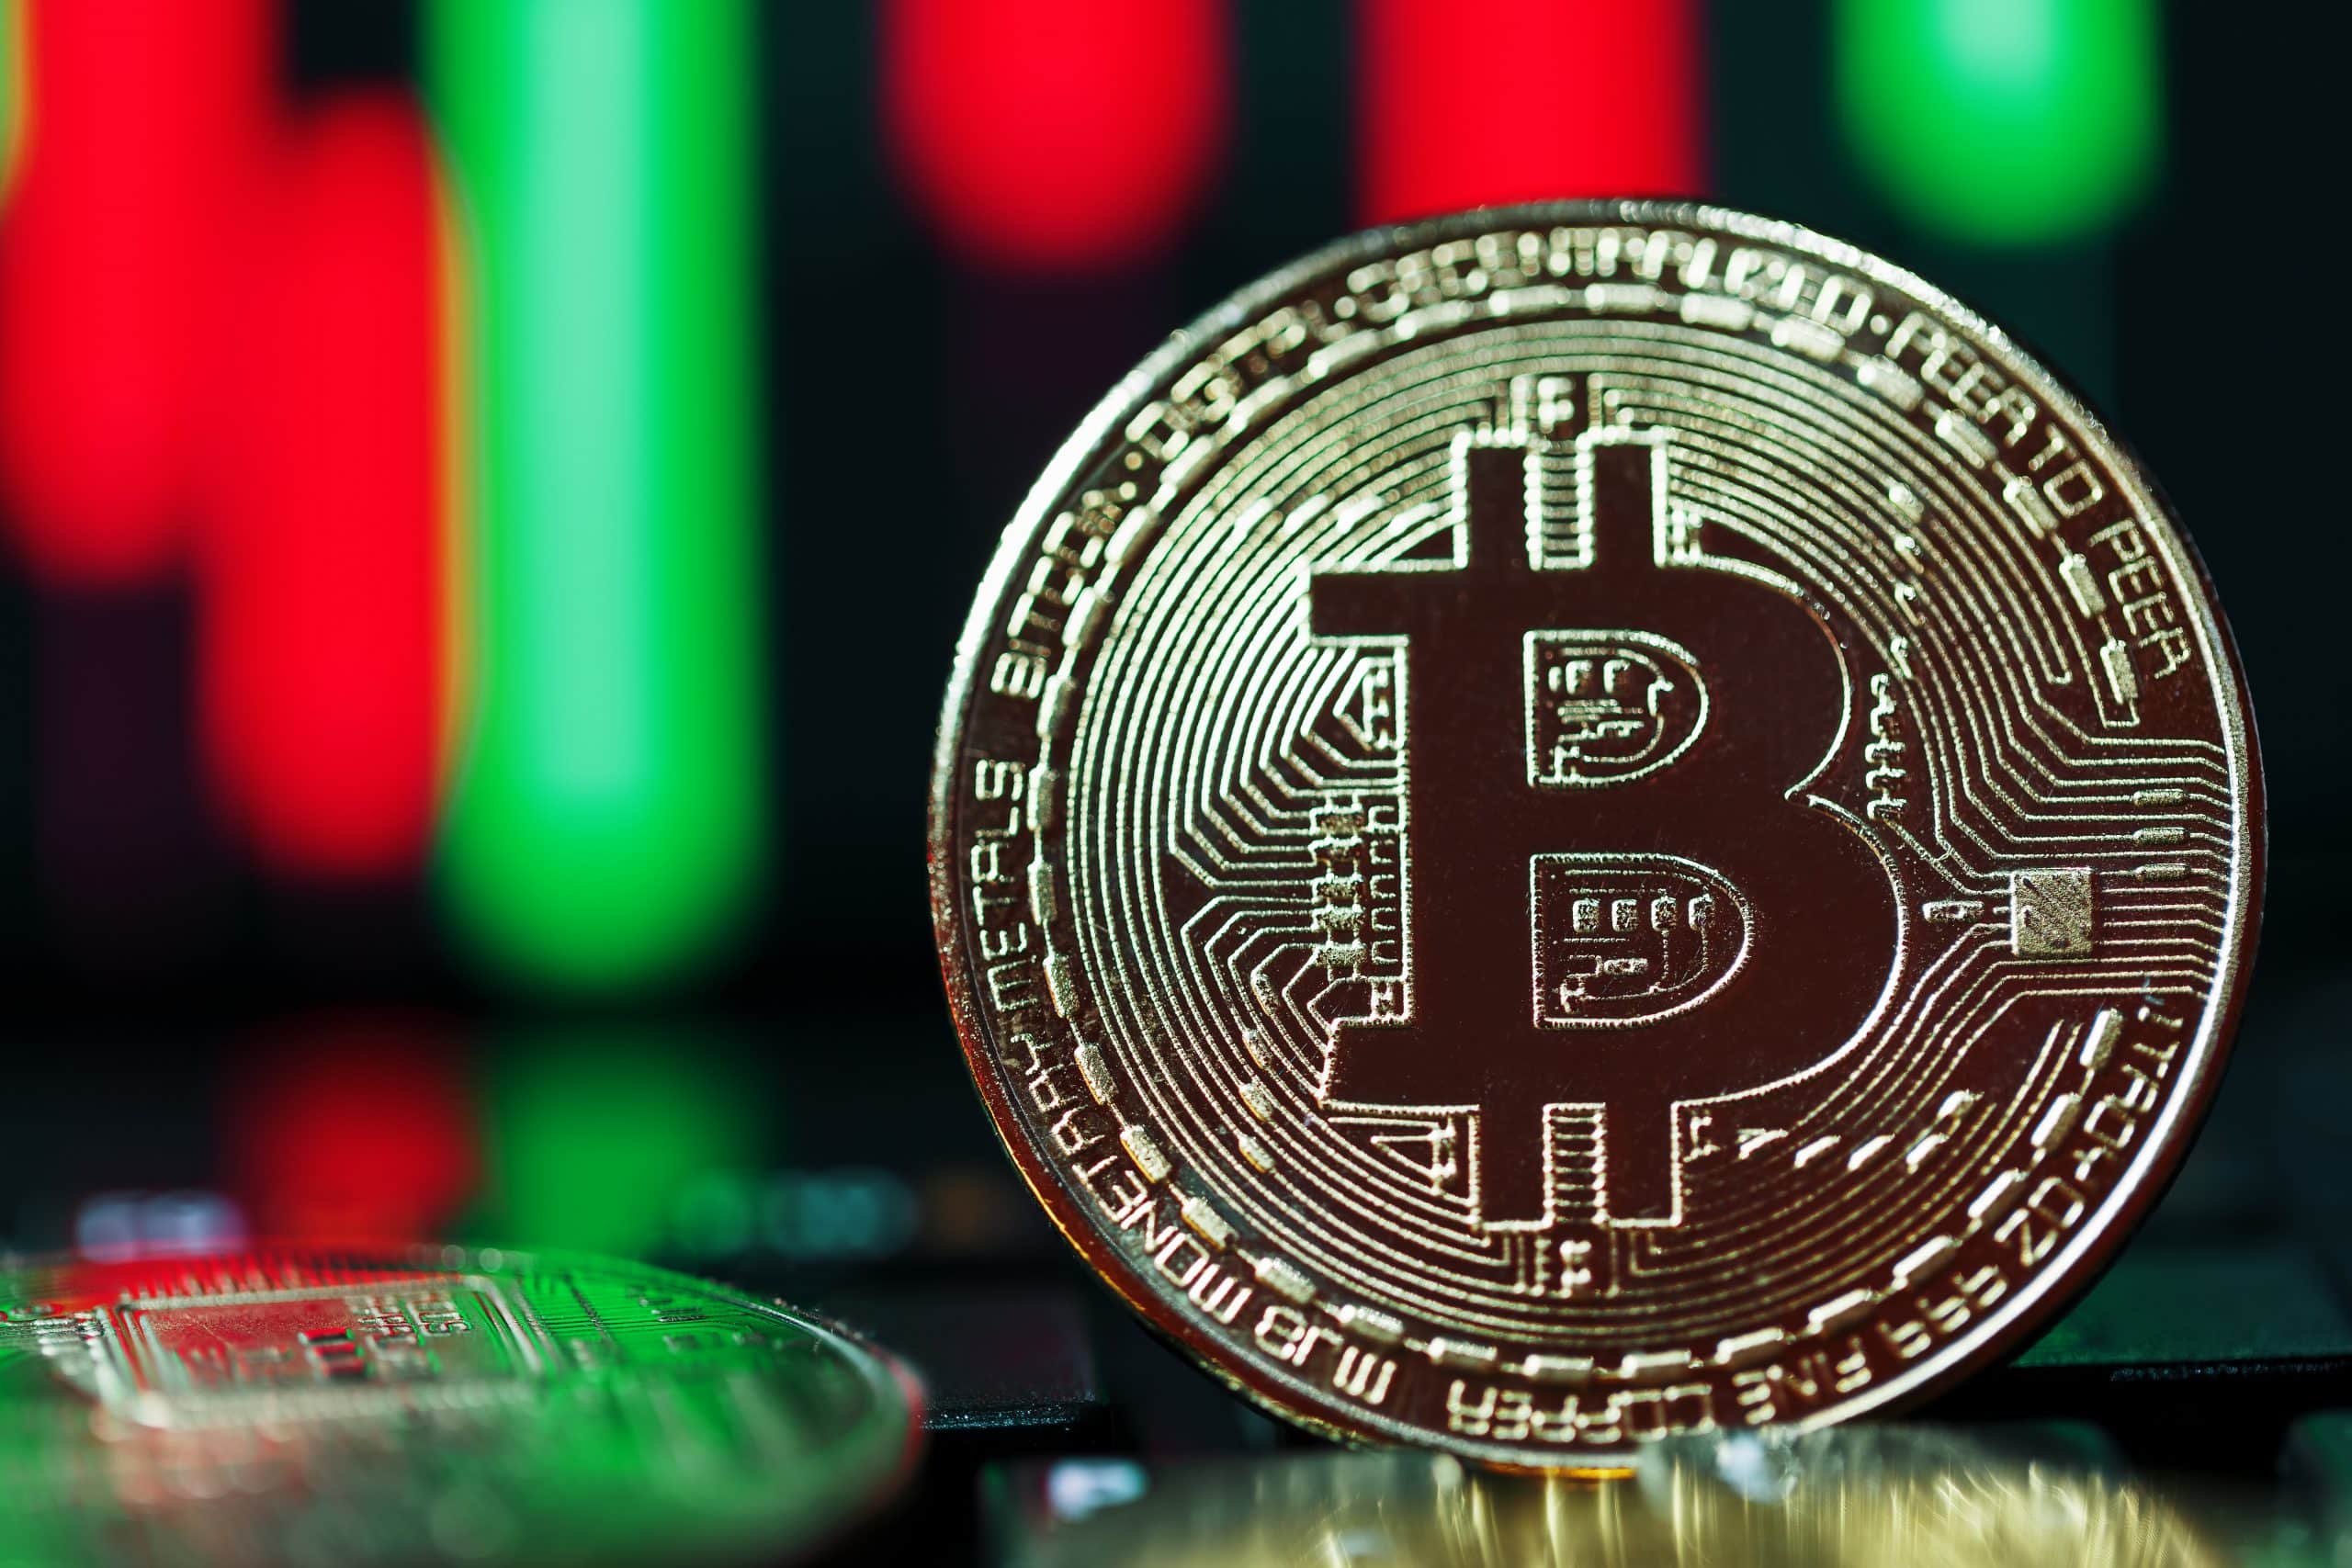 The course of the key cryptocurrency Bitcoin (BTC) is still not moving. Since forming the annual high on April 13, the key crypto currency has ranged in a 16 percent trading range without any impetus. Although the bulls were able to fend off a price drop in the direction of the old breakout mark around 25,000 US dollars in the previous week, there was no sustained recovery despite the new annual high of the Nasdaq100 technology index. One reason for Bitcoin's underperformance can be seen in the strength of the US Dollar Index DXY. This recovered noticeably in the last few weeks of trading and, as already mentioned in the last price analysis from May 2nd, acts as a headwind on the BTC price. However, this Friday afternoon at 5 p.m. the Bitcoin price could get a fresh boost. Fed Chairman Jerome Powell steps in front of the microphone and speaks about the current monetary policy situation in the USA. Course analysis based on the pair of values BTC/USD on Coinbase Bitcoin: Bullish price targets for the coming trading weeks Bullish price targets: $27,238, $27,565/$27,841, $28,326/$28,596, $29,048/$29,216, $29,847/$30,060 $30,404/$30,615, $31,049, $31,755, $32.403/$32.938 USD The BTC price is currently in a downtrend channel. Last Friday, May 12, Bitcoin reached its bottom at $25,813 before staging a first interim rally back towards the old support area around $27,600. Here the supertrend in the 4-hour chart blocked the way for a subsequent increase towards the top of the trend channel in the last few trading days. First, bitcoin needs to stabilize above $27,238 and subsequently push through the green resist area to the upside. With the Supertrend and the EMA200 in the 4-hour chart, there are several technical hurdles waiting in this zone. Only if Bitcoin can recapture the $ 28,596, a renewed increase in the direction of the golden pocket of the current corrective movement between $ 29,048 and $ 29,216 is conceivable. This is also where the upper edge of the trend channel currently runs. A breakout of the channel would brighten the chart significantly. The buyer camp should then lift the Bitcoin price into the blue resistance zone between US$ 29,847 and US$ 30,060. If Bitcoin does not bounce dynamically to the south and overcome this neuralgic zone, the zone around the annual high at 30,615 US dollars will come into focus. Here the BTC course failed several times in April. If the buyer side then succeeds in breaking through this area in the long term, Bitcoin could march through the year high of $31,061 towards $31,755. To break through this area, the bulls will have to show strength again. Only when Bitcoin pulverizes this area can a subsequent increase to the next relevant target area between US$ 32,403 and US$ 32,938 be planned. The old low of January 25, 2022 at 32,938 US dollars represents the short-term maximum price target for the coming trading weeks. Bitcoin: Bearish Bitcoin price targets for the coming trading weeks Bearish Targets: $26,686/$26,543, $26.151/$25.813, $25,304/$25,000, $24,389/$23,919 $22,814/$22,519, $21,977 The bears have remained in control for the past few weeks of trading. As long as Bitcoin remains capped below $27,800, the technical chart situation will not change. Should Bitcoin promptly correct below the turquoise zone and undercut yesterday's daily low of 26,361 US dollars, a return to the area around the monthly low of 25,813 US dollars is to be planned. If the BTC price does not bounce north again and does not form a double bottom, a retest of the blue support zone between US$ 25,304 and US$ 25,000 becomes increasingly likely. This zone continues to act as a key target area and strong support on a daily basis. Buyers are likely to take more action here and stabilize the price. However, a short-term spike below this key area into the red support zone between $24,389 and $23,919 cannot be ruled out. However, should Bitcoin not find a footing here and fall out of the trend channel to the south for a long time, the chart picture would cloud over further. A daily close below the red support area would result in a sell-off into the $22,814-$22,519 zone. Even a drop back to US$ 21,977 could no longer be ruled out as a result. Looking at the indicators The RSI as well as the MACD in the 4-hour chart are currently showing signs of weakness. The RSI is trading at the lower edge of the neutral zone at the 45 level. The MACD indicator has a sell signal. On a daily basis, both indicators currently also have an active short signal. Due to the bearish price development in the last few weeks of trading, both indicators have also cooled down noticeably in the weekly chart. If the price weakness persists, the MACD threatens to activate a fresh sell signal in the coming weeks. With a value of 56, the RSI indicator is also only just above the neutral zone and is threatening to neutralize the buy signal that was formed in 2023.